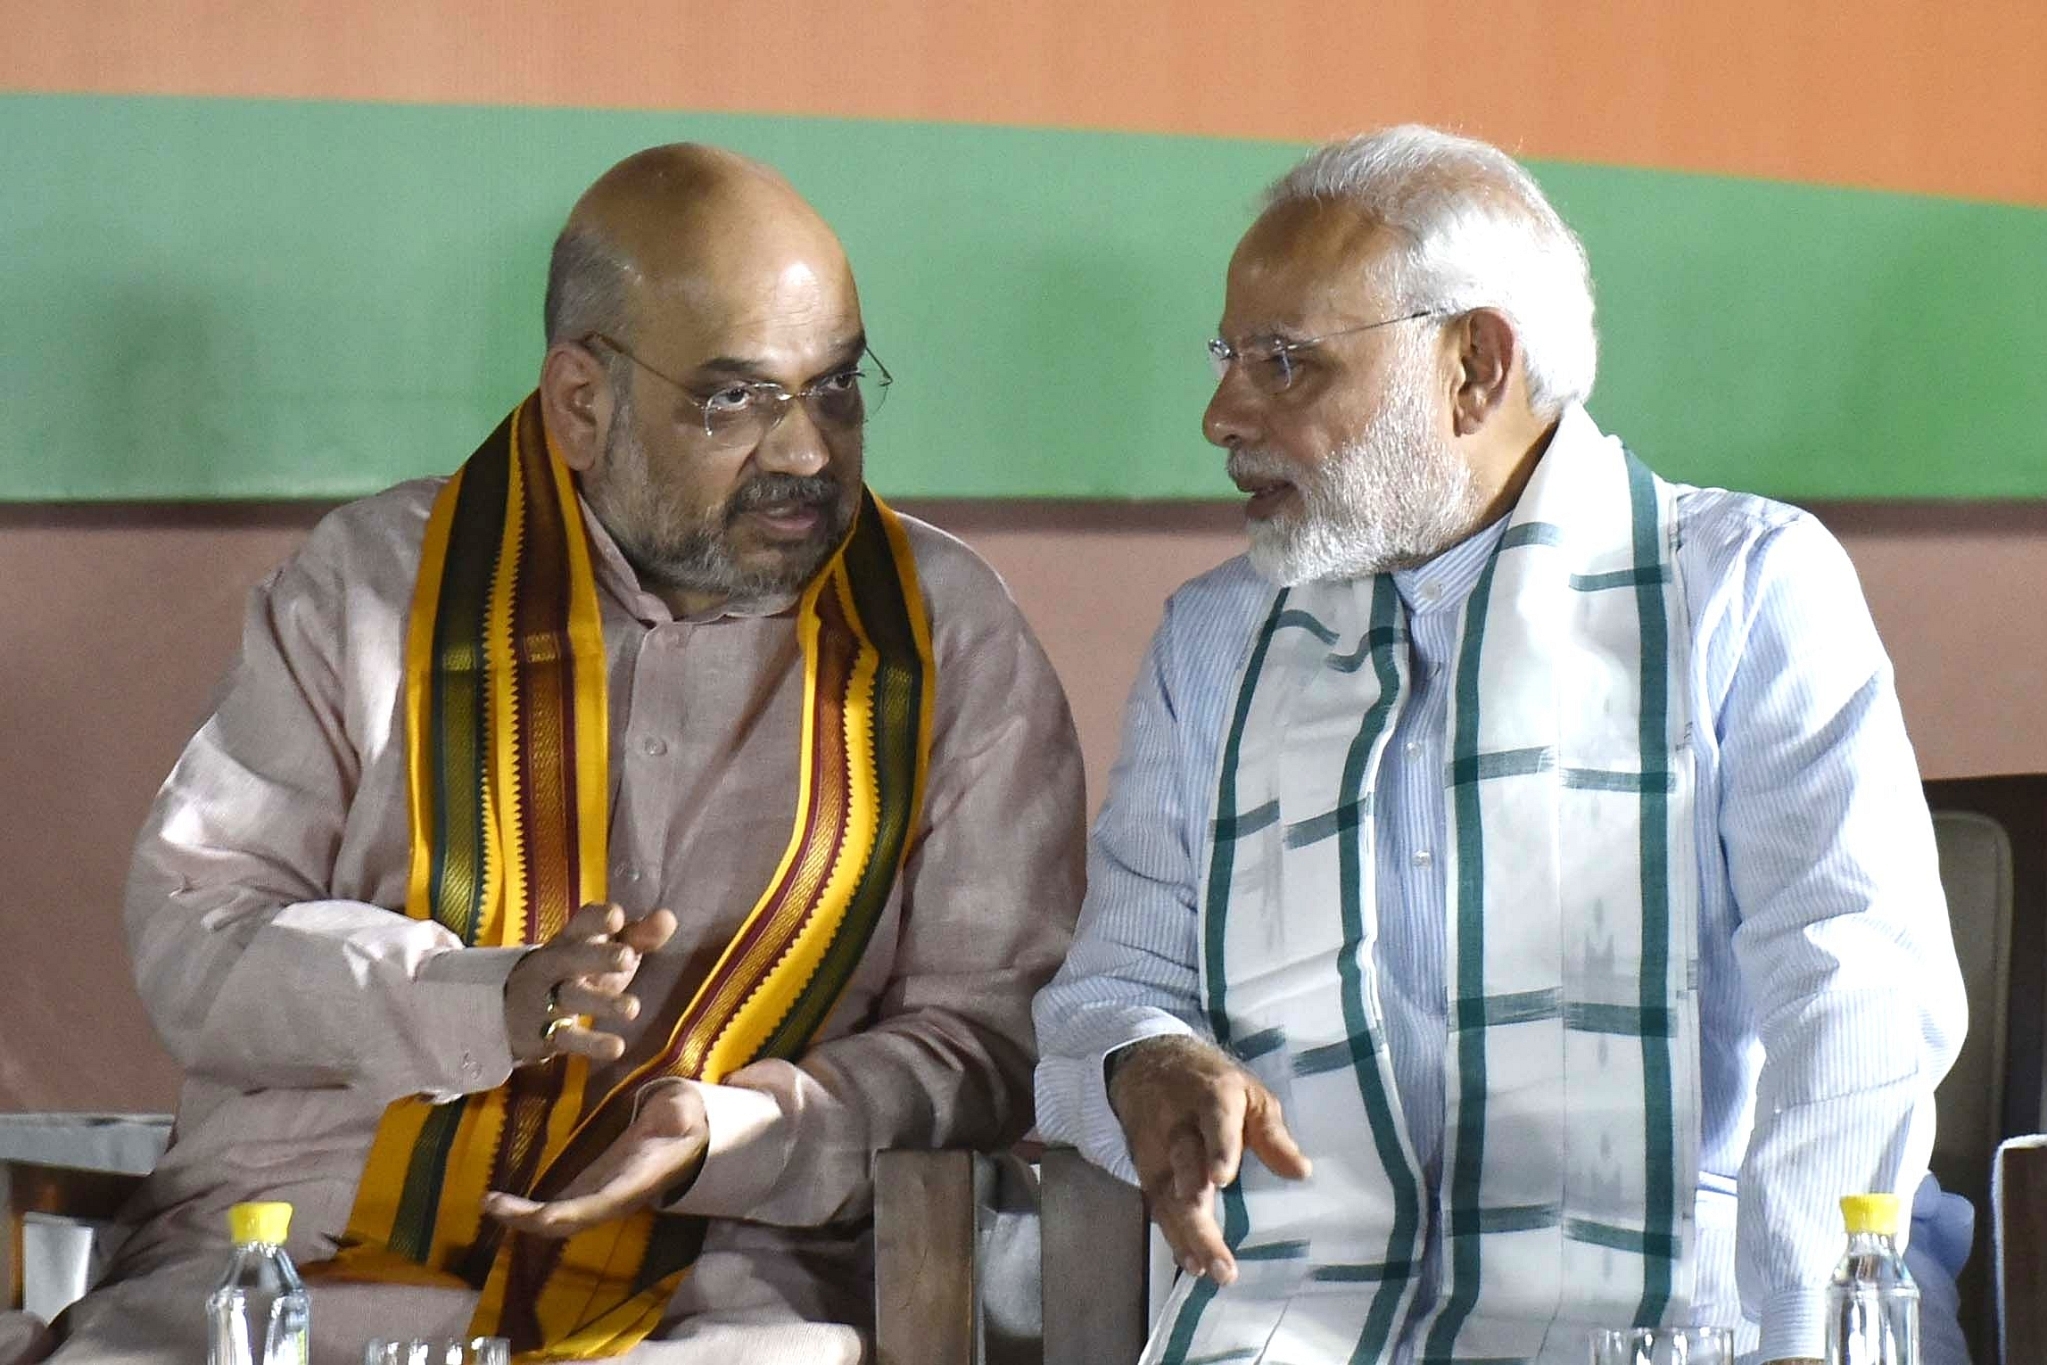 Prime Minister Narendra Modi with Home Minister Amit Shah. (Vipin Kumar/Hindustan Times via Getty Images)